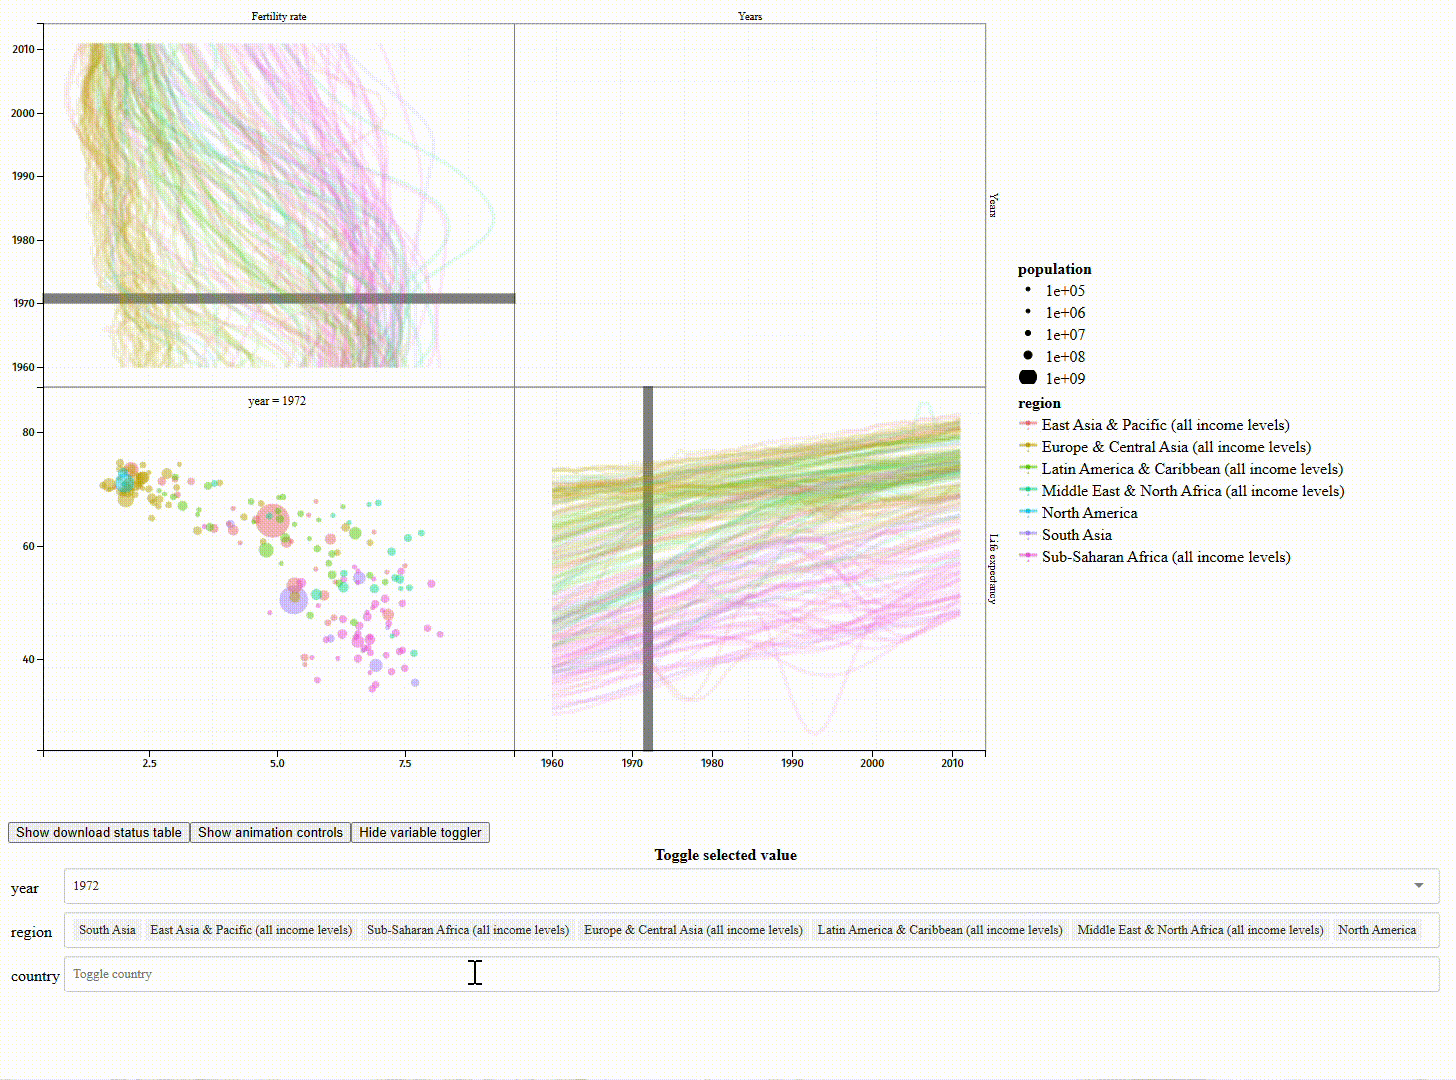 A screencast of an interactive data visualization displaying fertility data from the World Bank. The user types in the selection menu and clicks on the legend, which causes changes in the visualization. GIF.